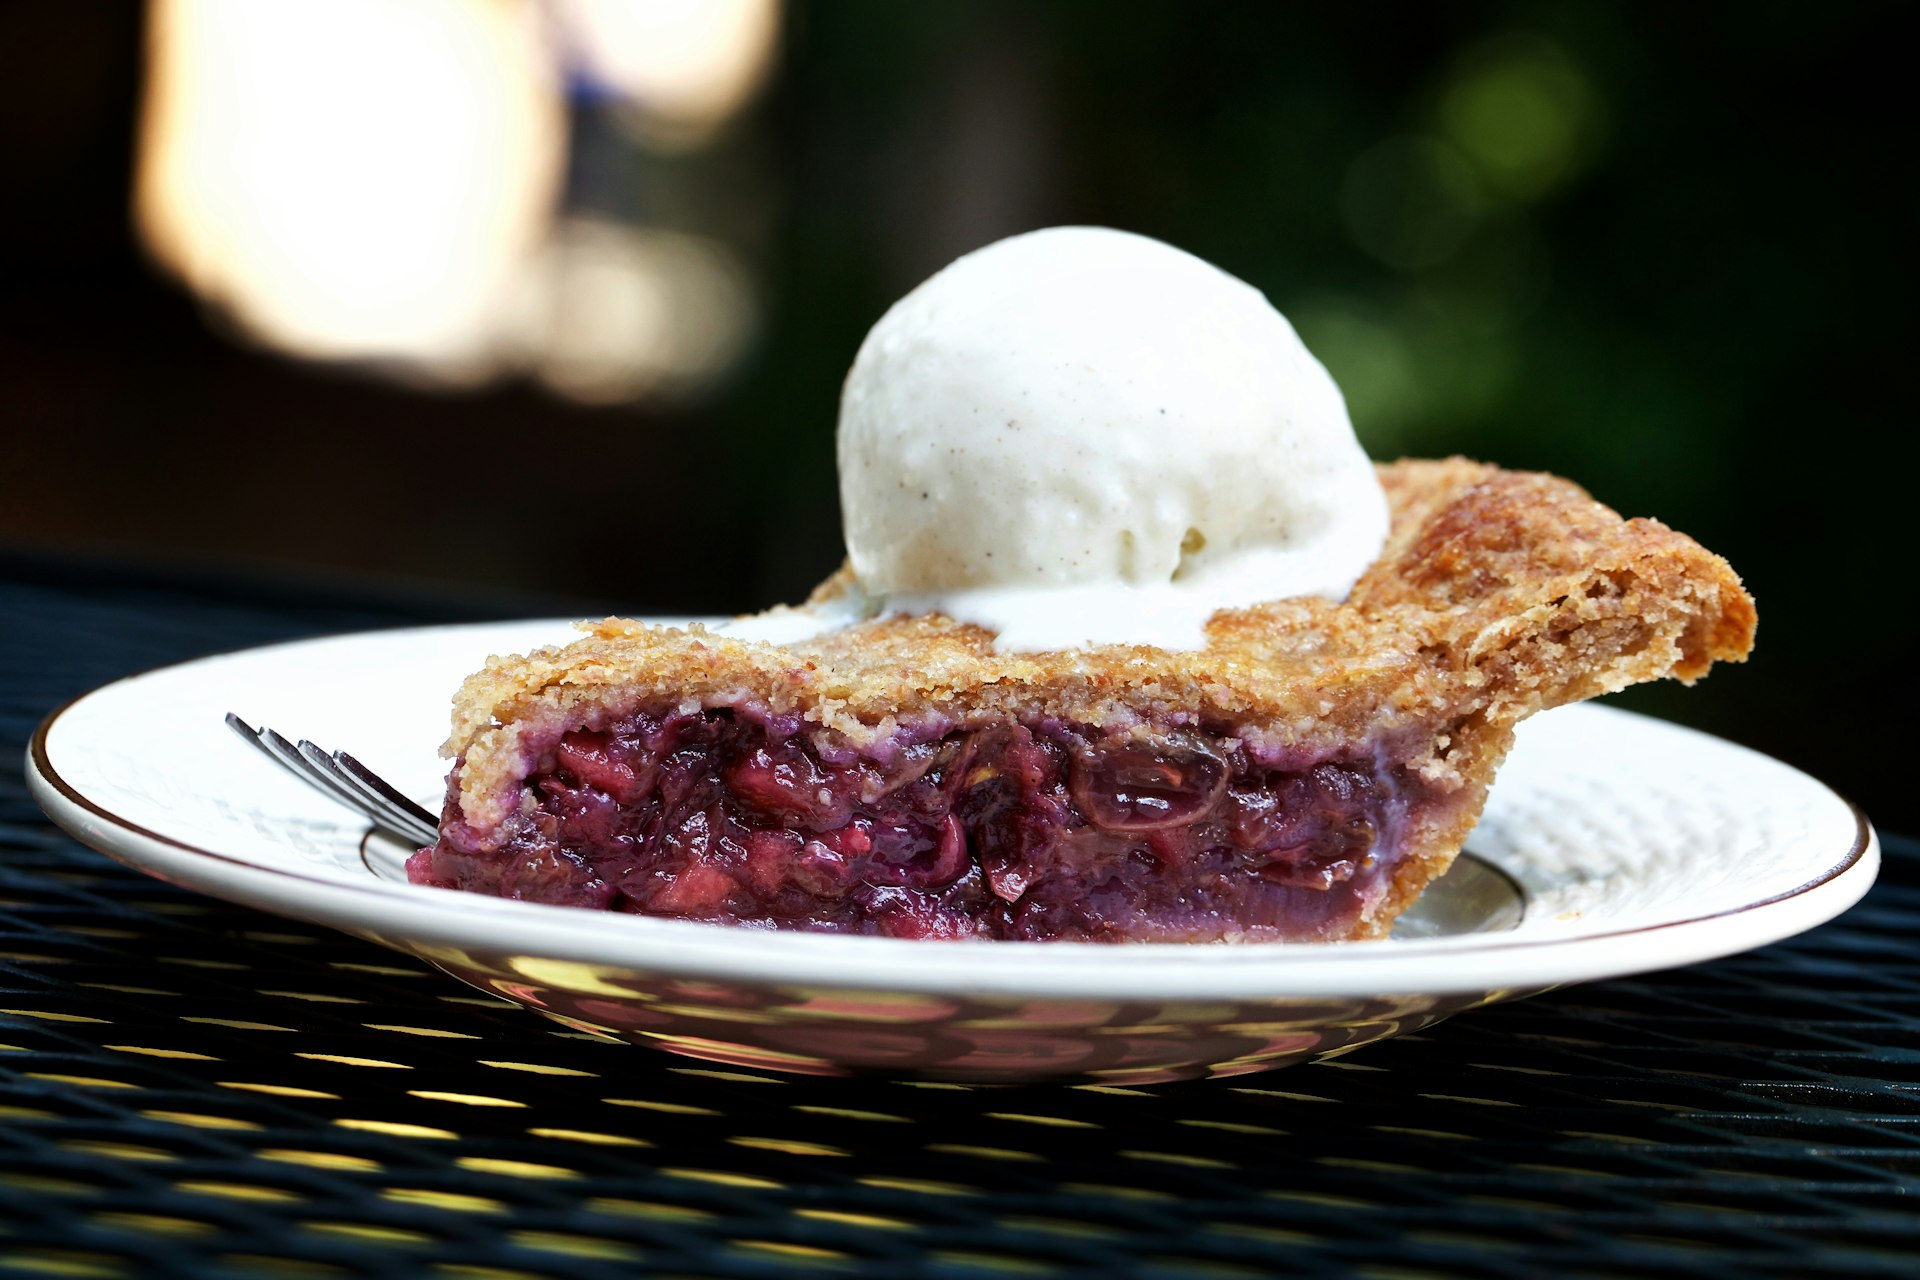 Concord Grape Pie with rye crust is topped with vanilla ice cream 